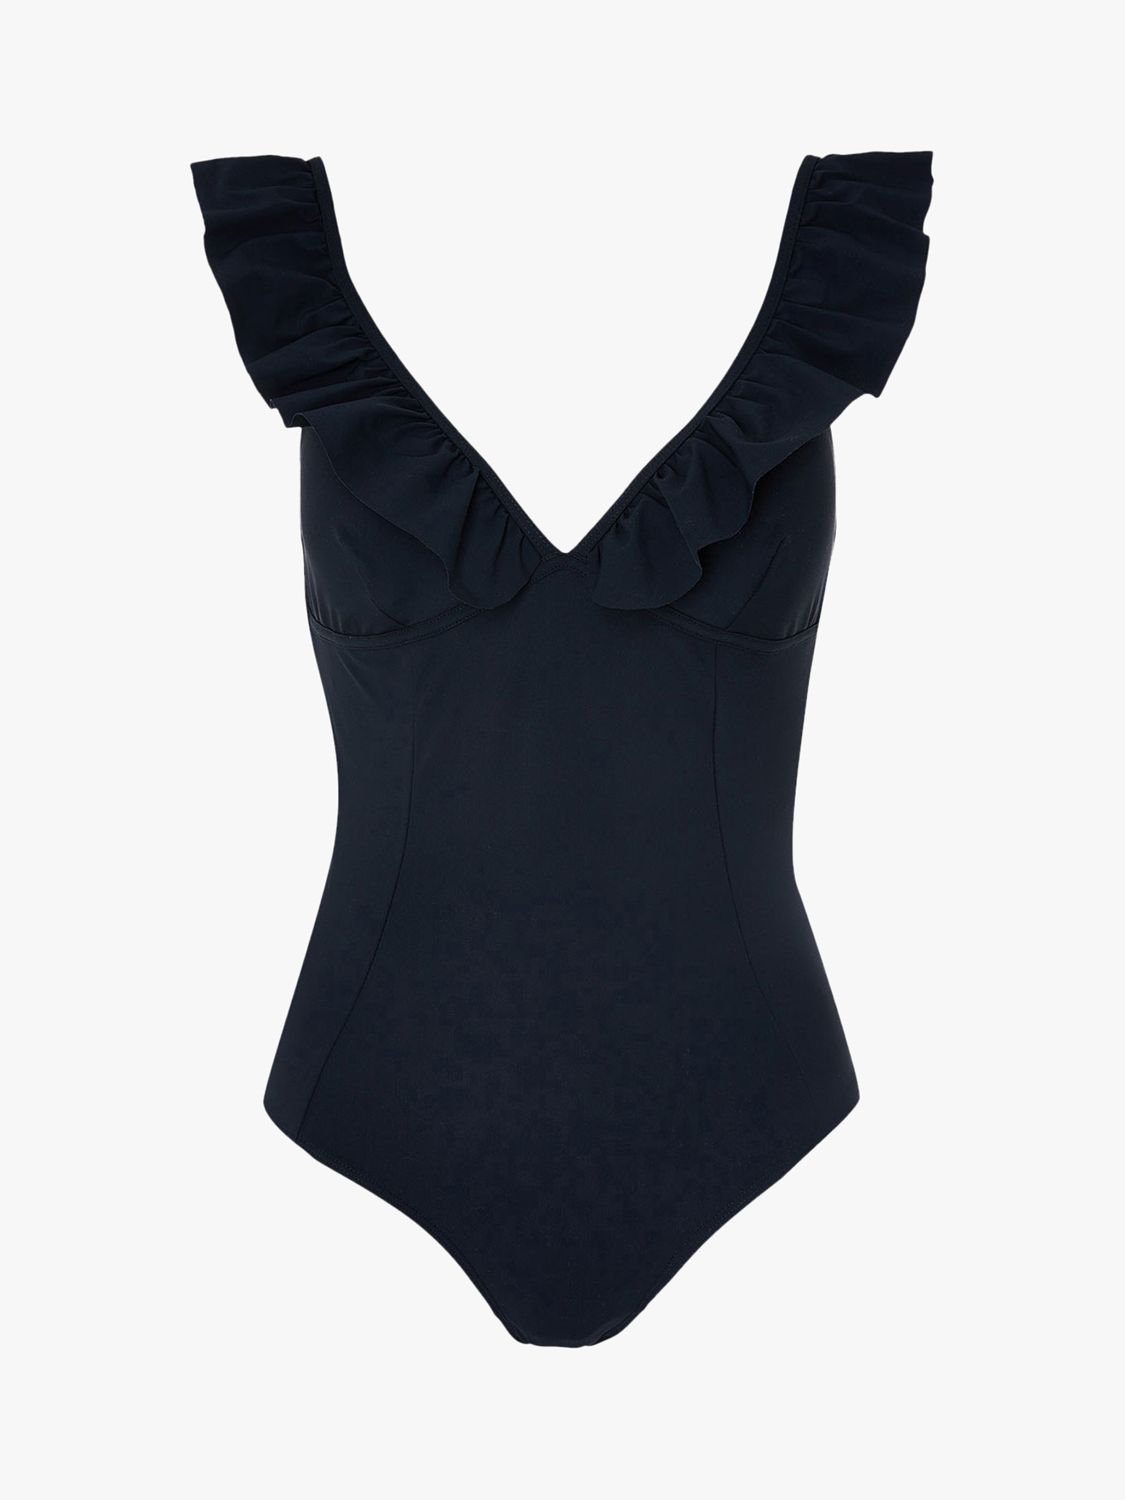 Accessorize Ruffle Detail Shaping Swimsuit, Black at John Lewis & Partners